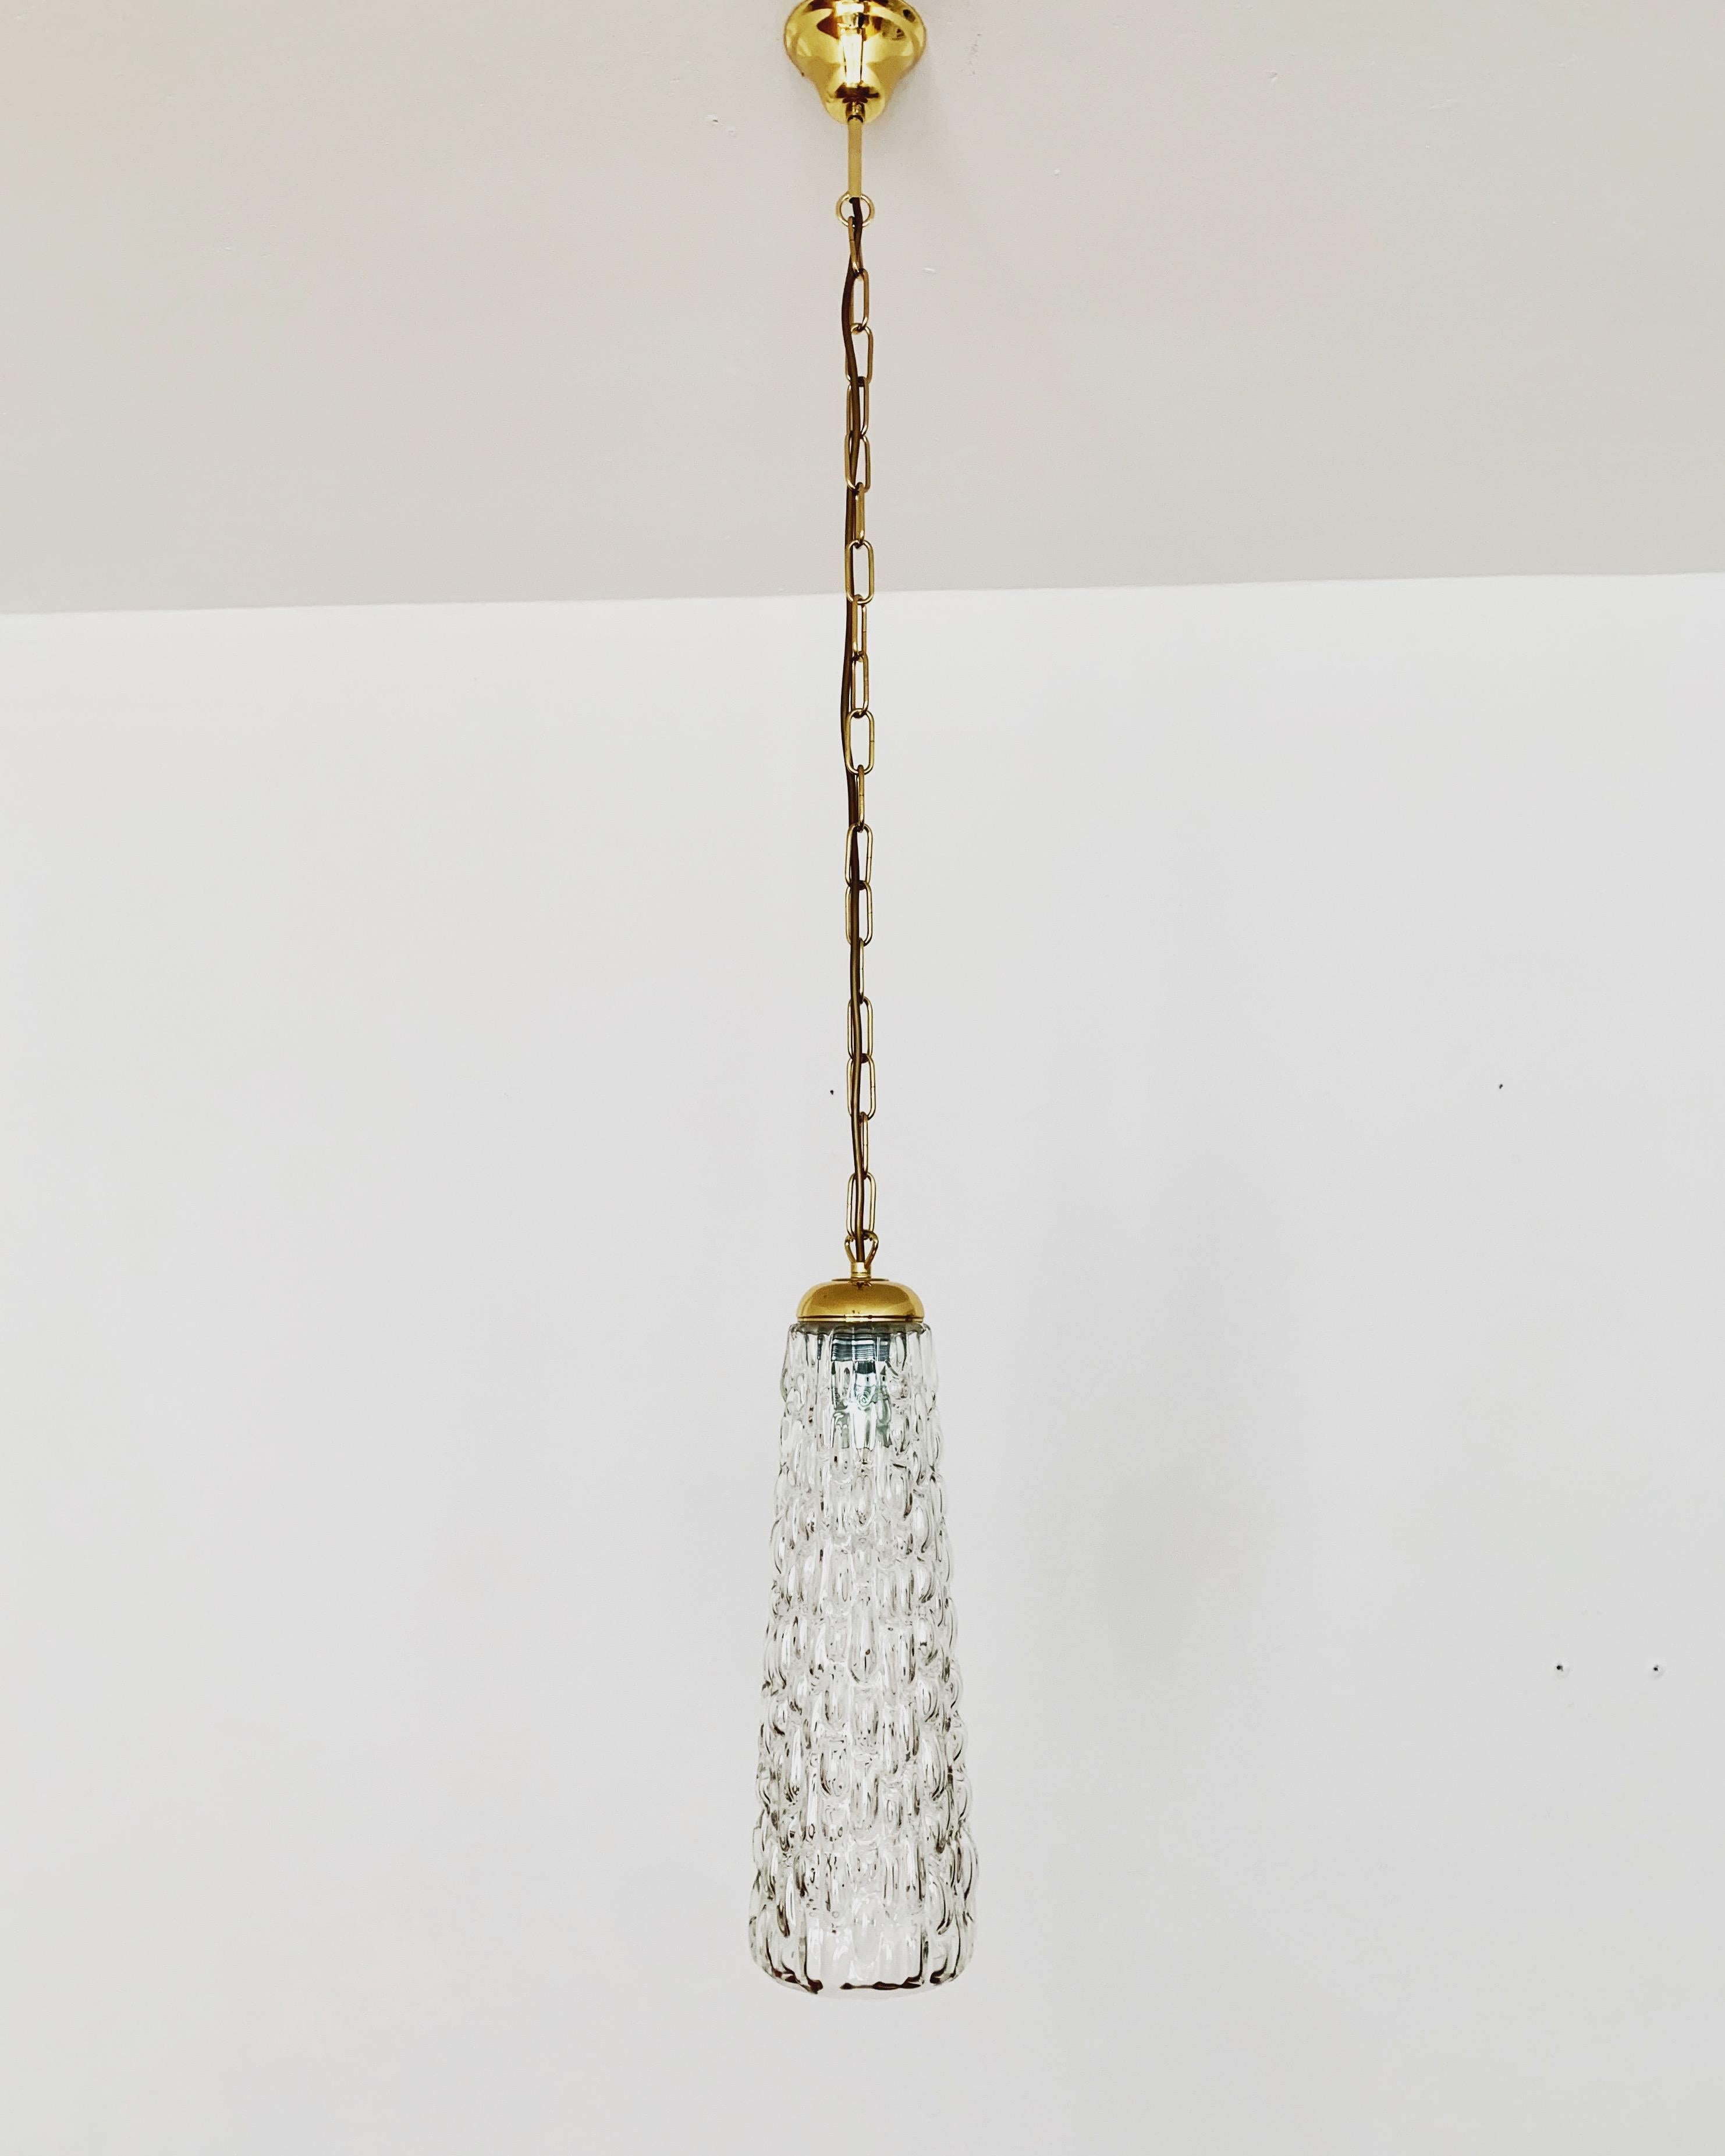 Very beautiful and large crystal glass pendant lamps from the 1950s.
Wonderful mouth-blown glass with a great structure.
The design and the materials used create a great glittering light.
A stunning lamp and a real addition to any